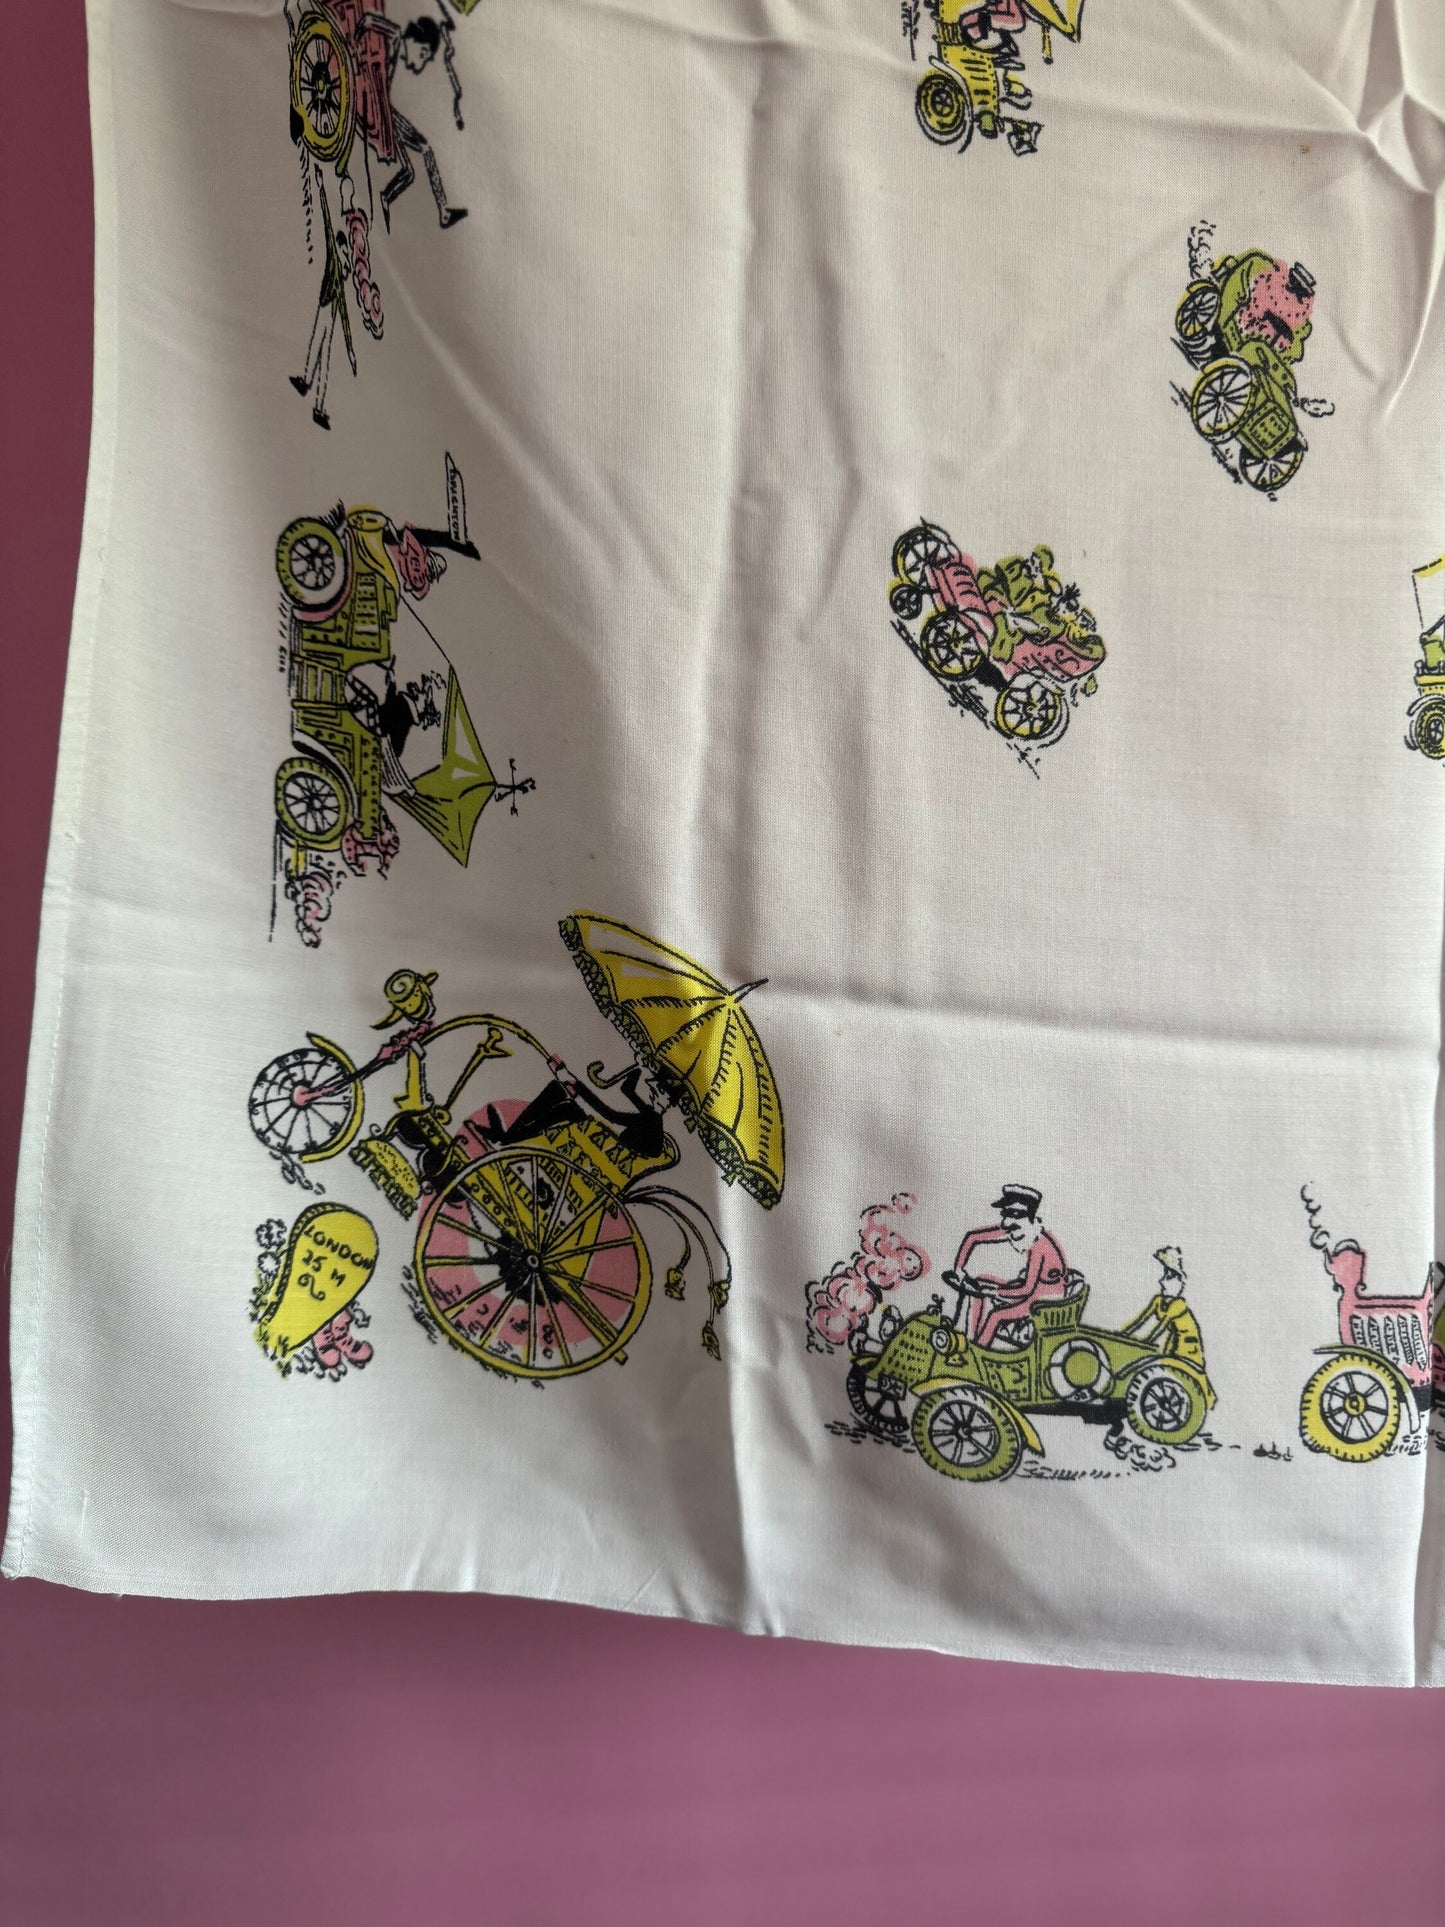 32” old cars transport Vintage printed tablecloth for tea party